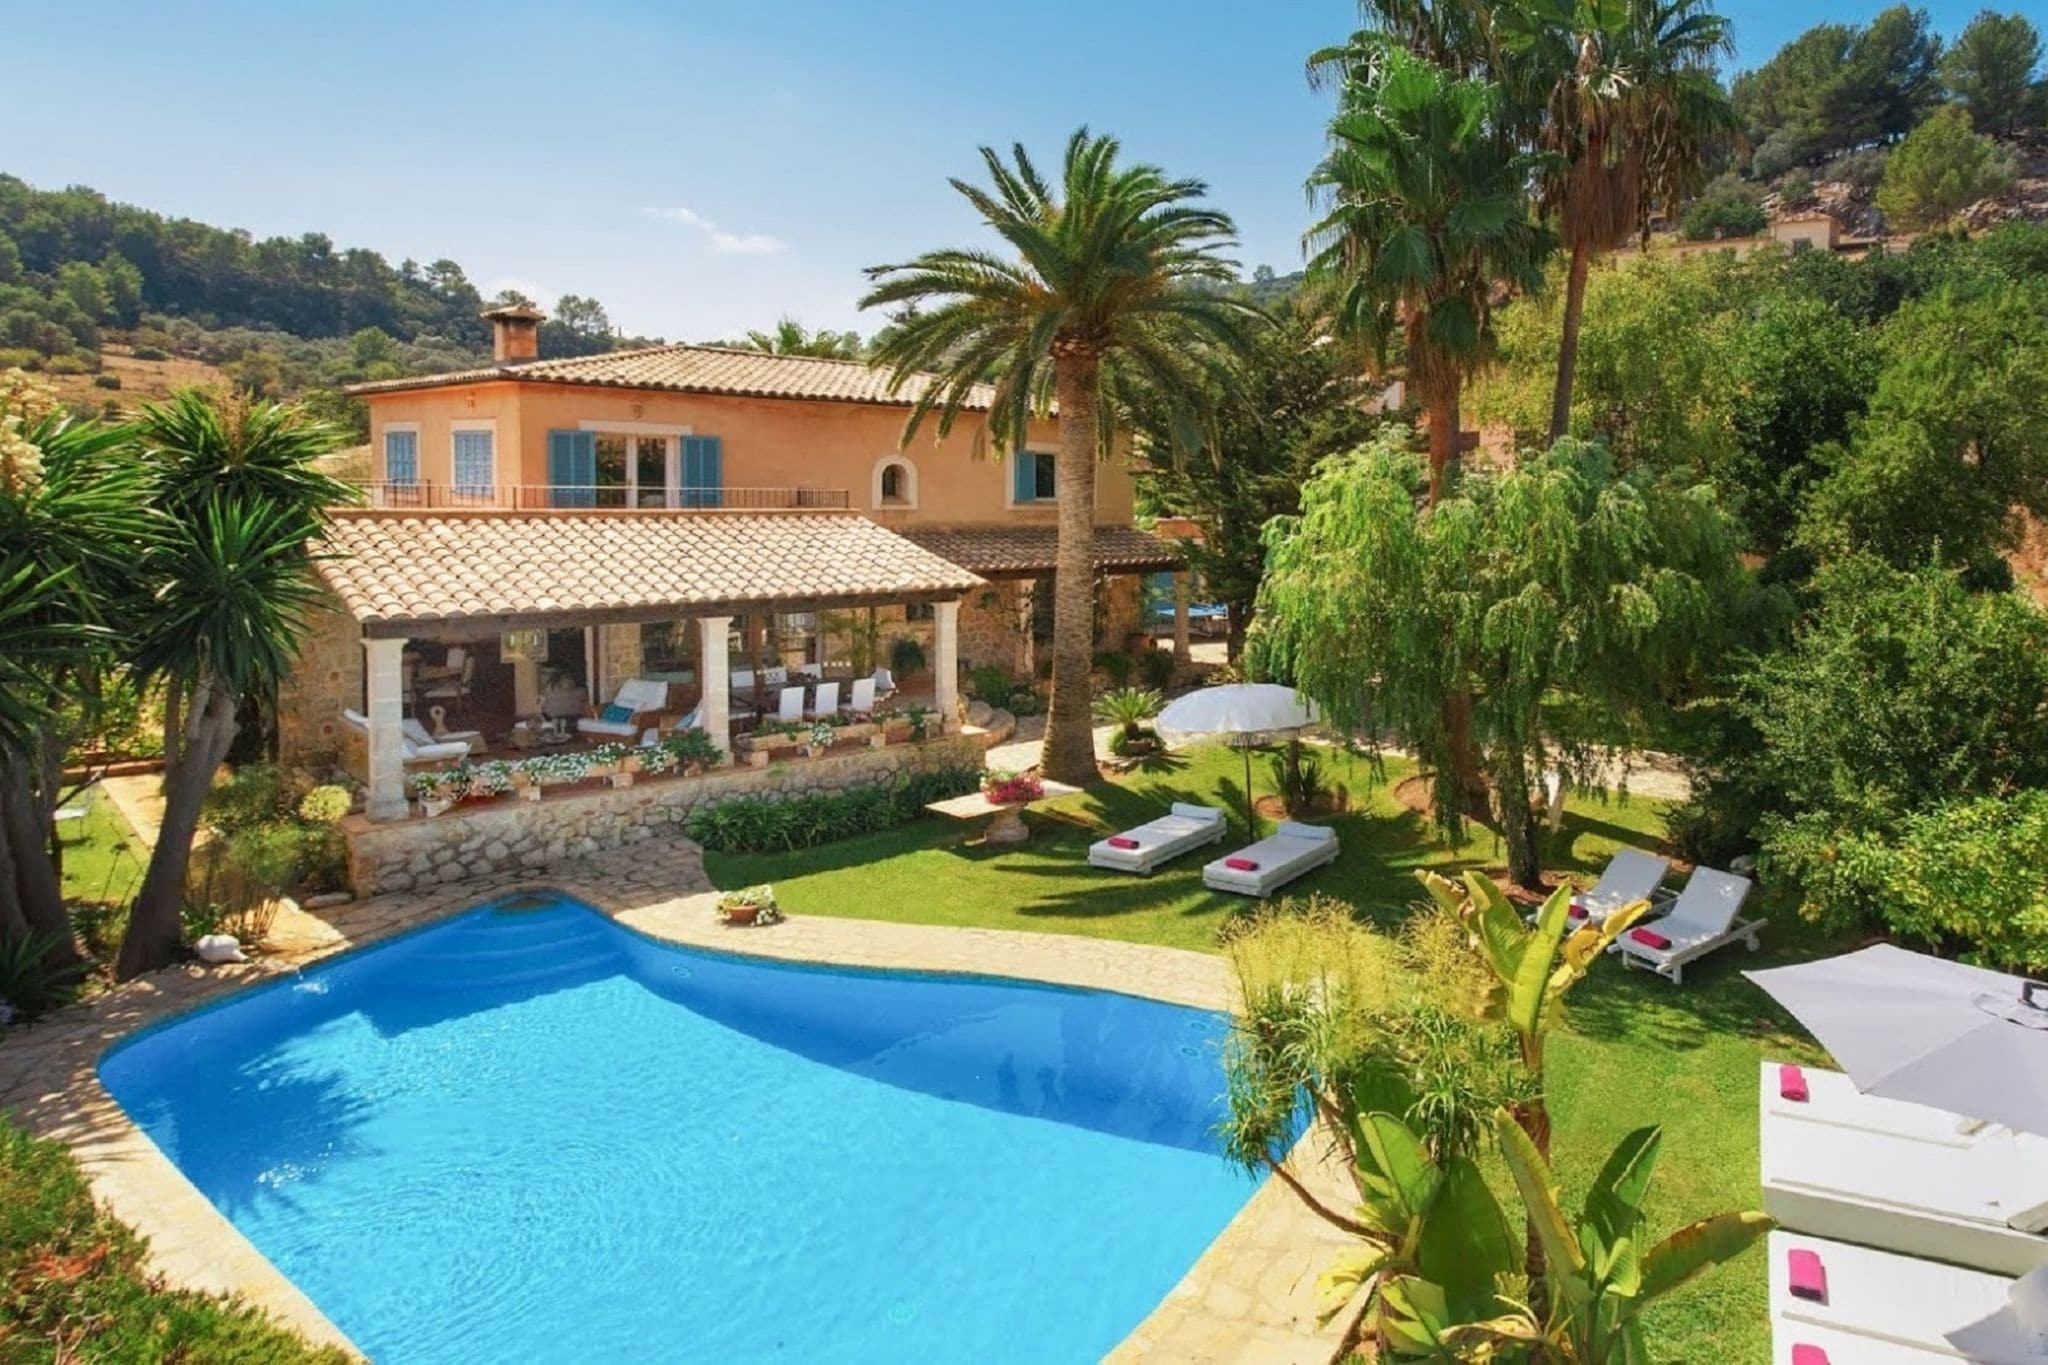 Swanky mansion in Mancor de la Vall with pool